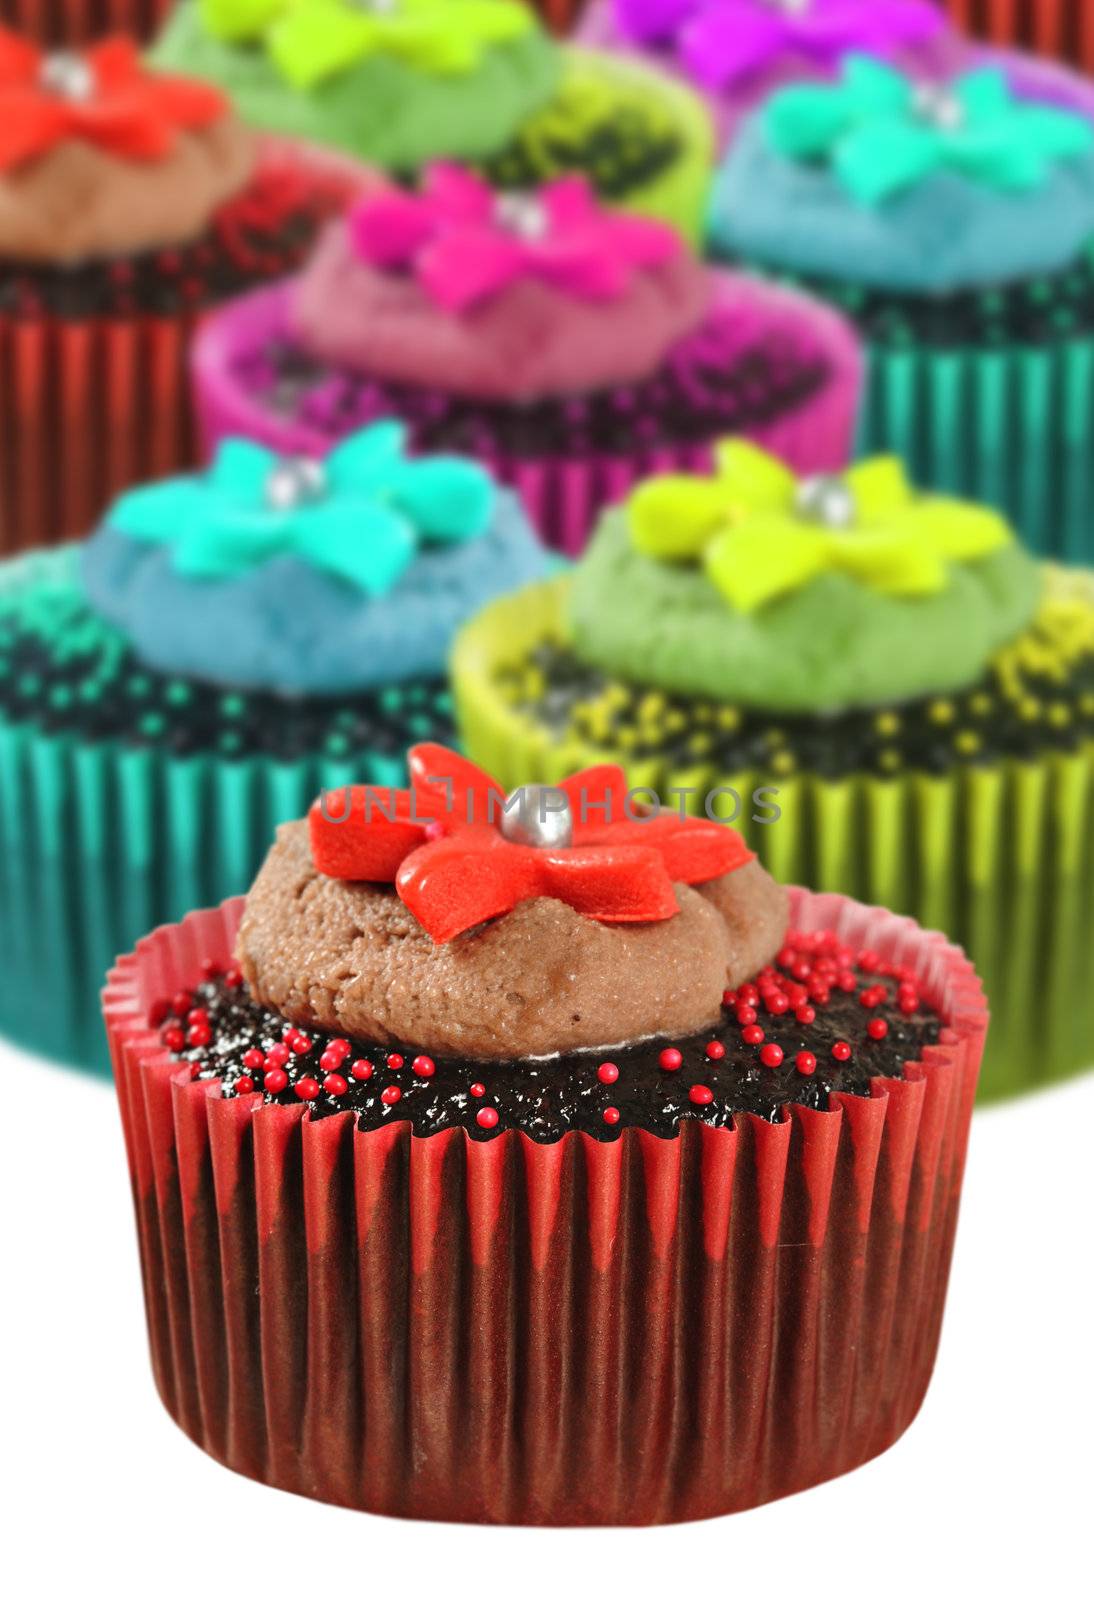 Chocolate cupcakes in colorful cups by tish1